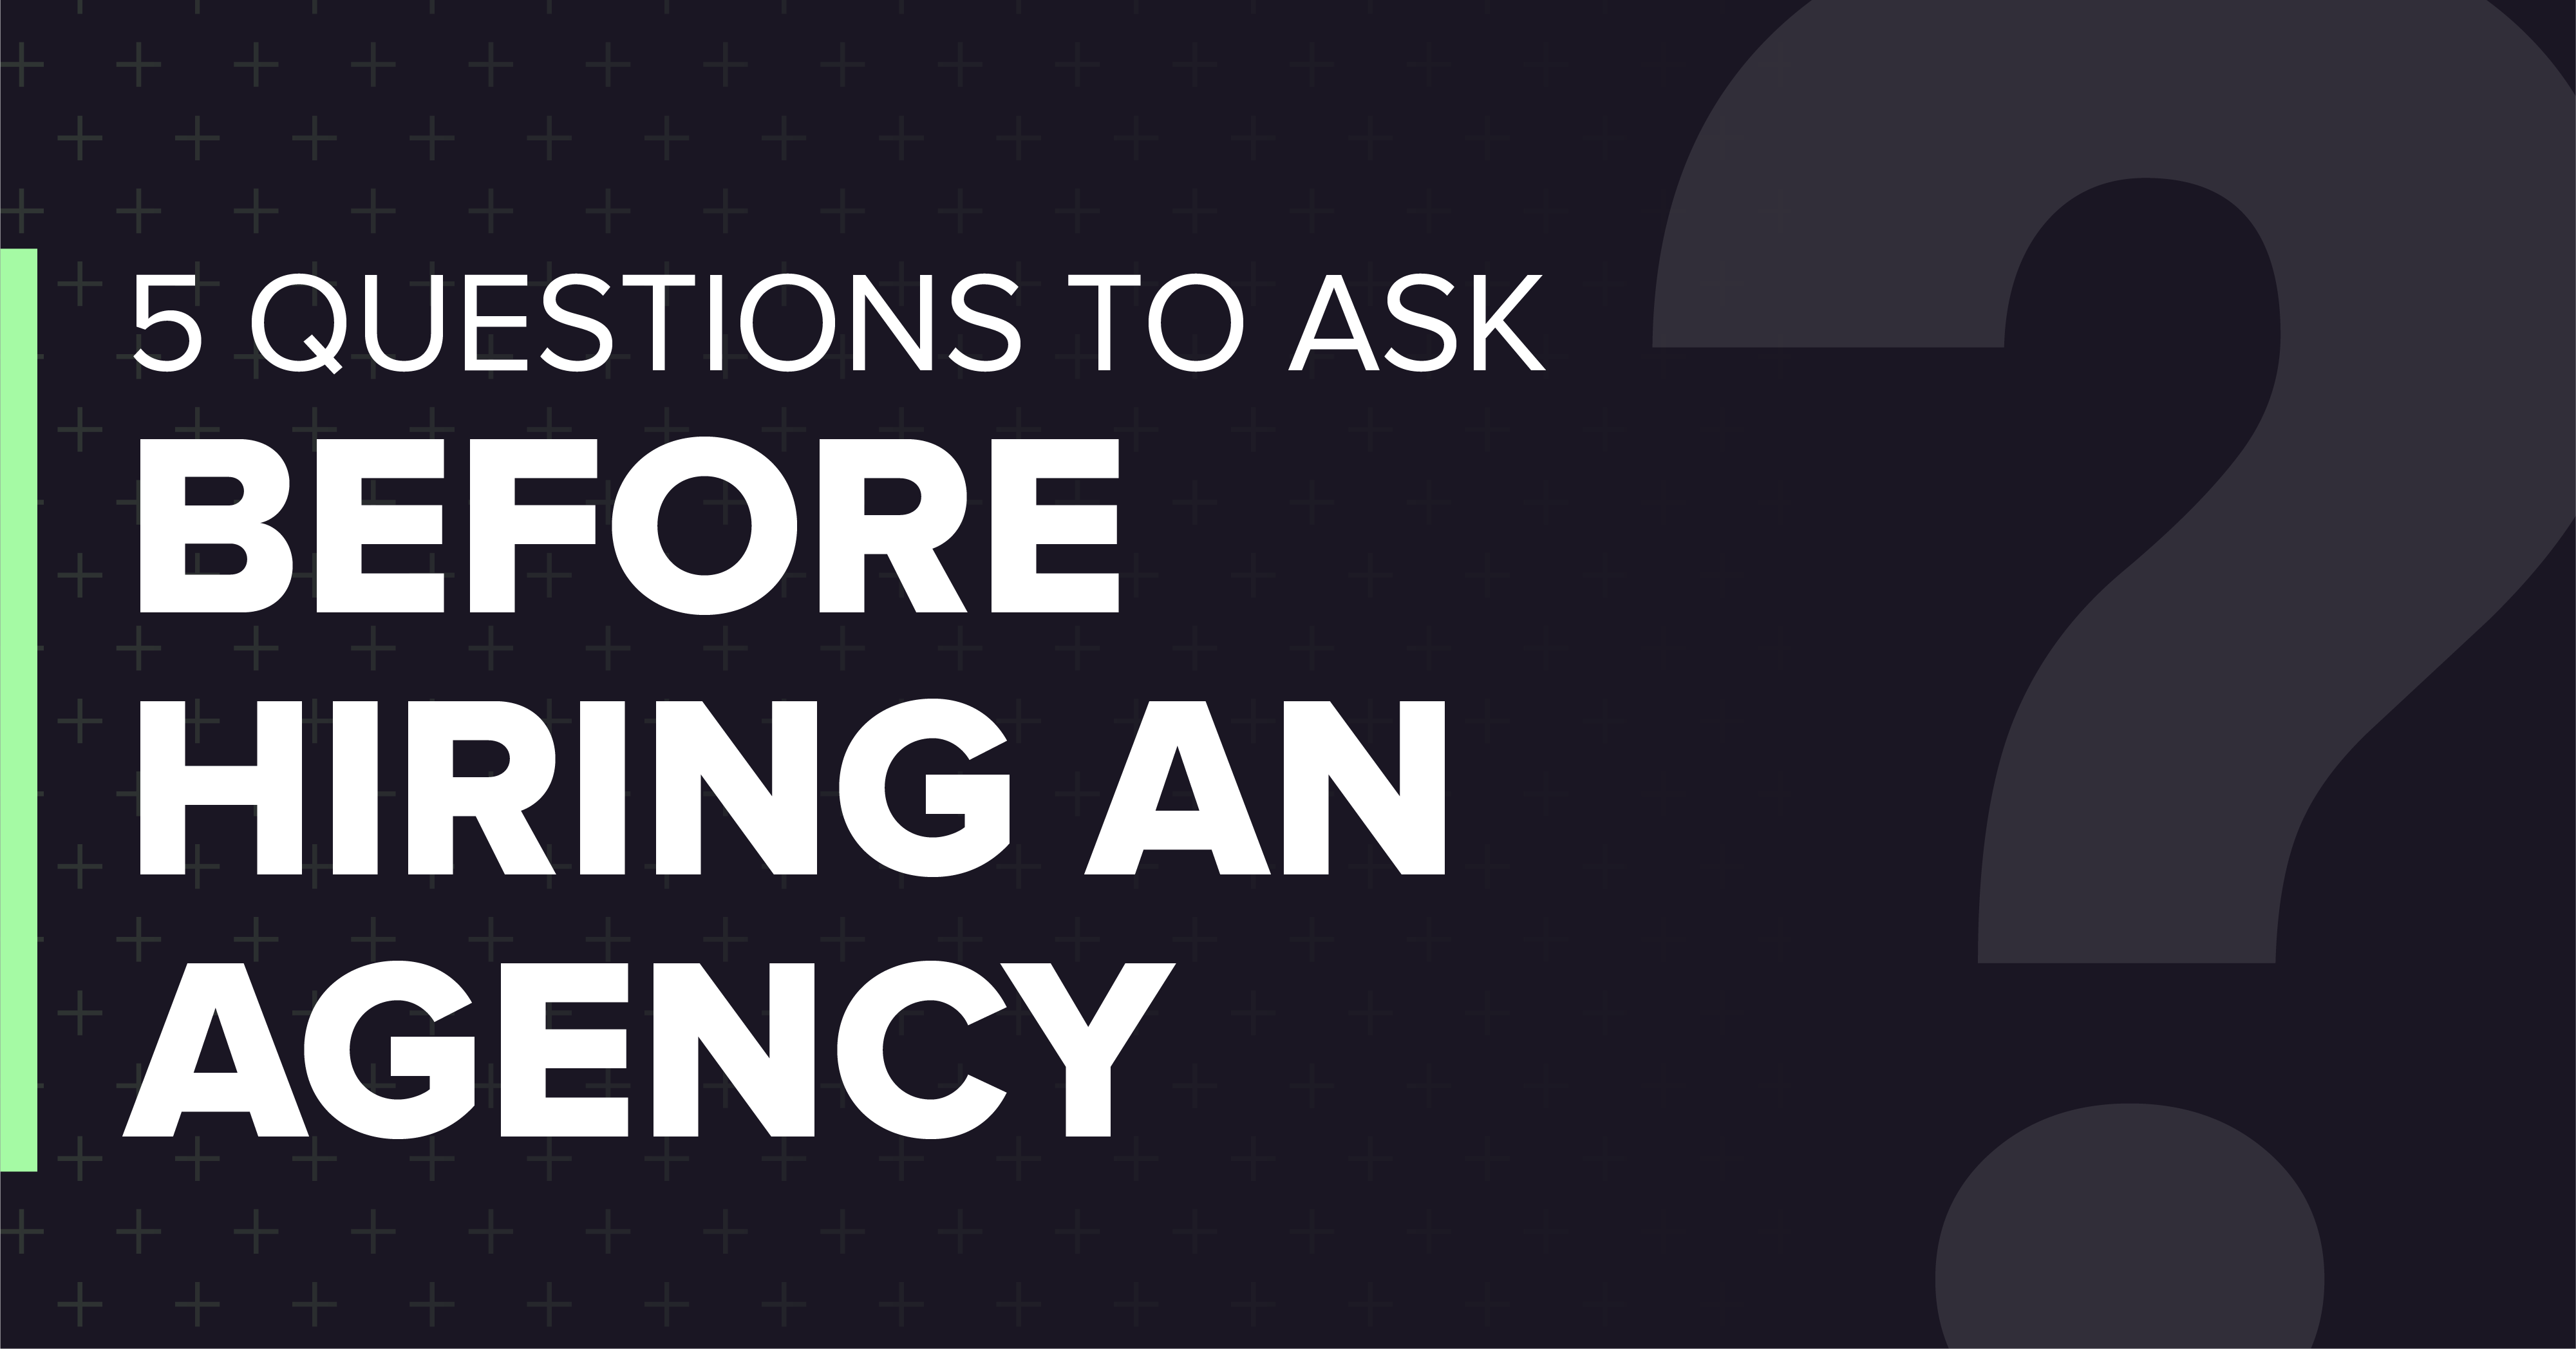 5 Questions to ask before hiring an agency.